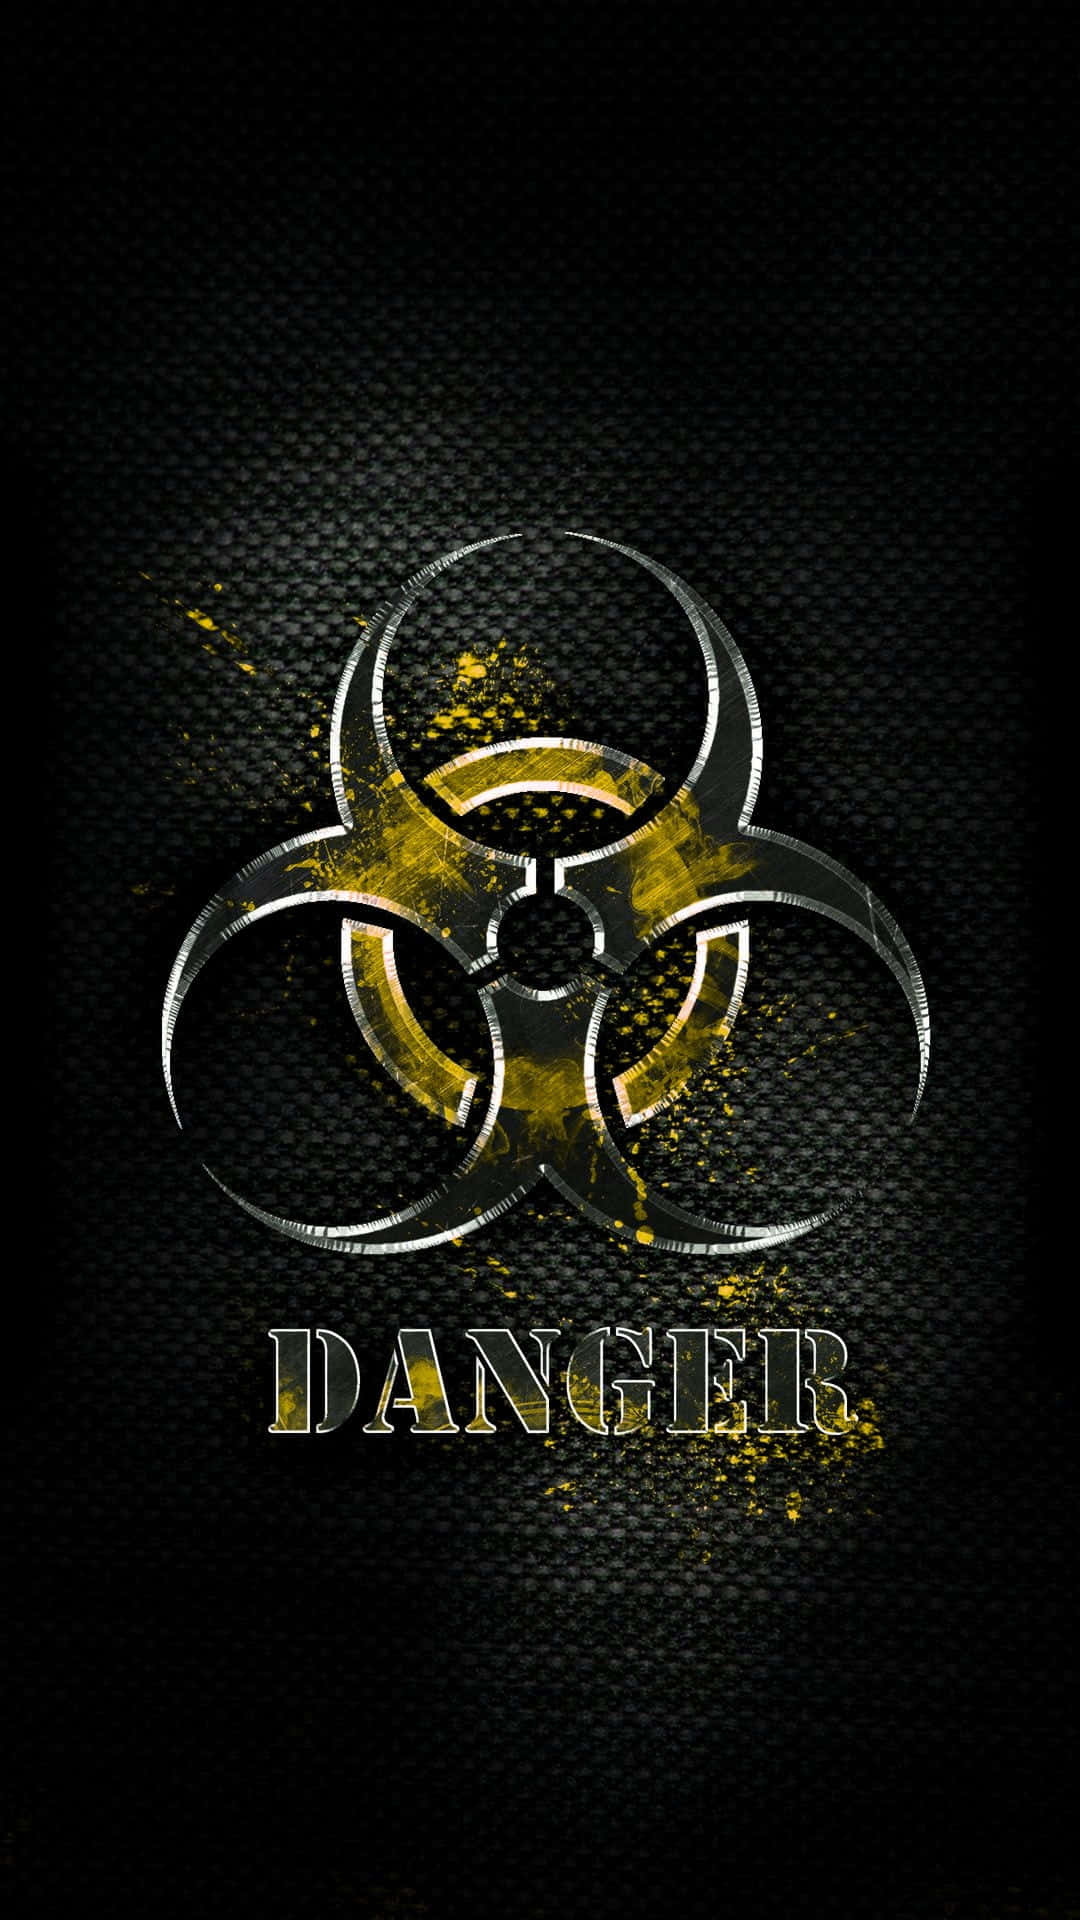 Danger Wallpapers Hd - Wallpapers For Pc